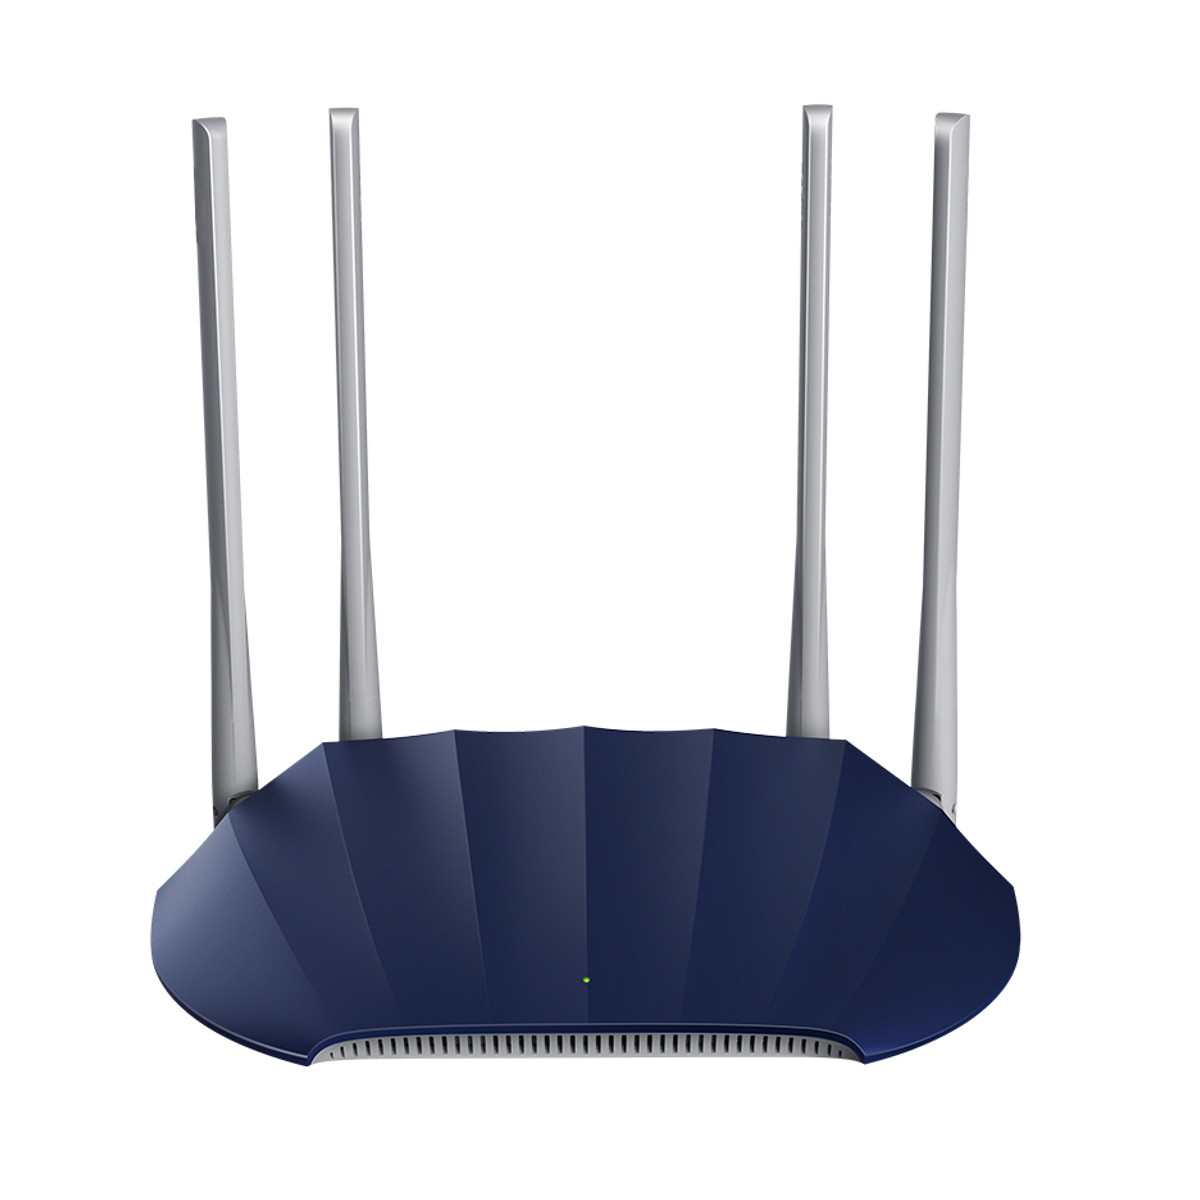 Роутер fast. Circular Wireless Router. Top view Wireless Router.